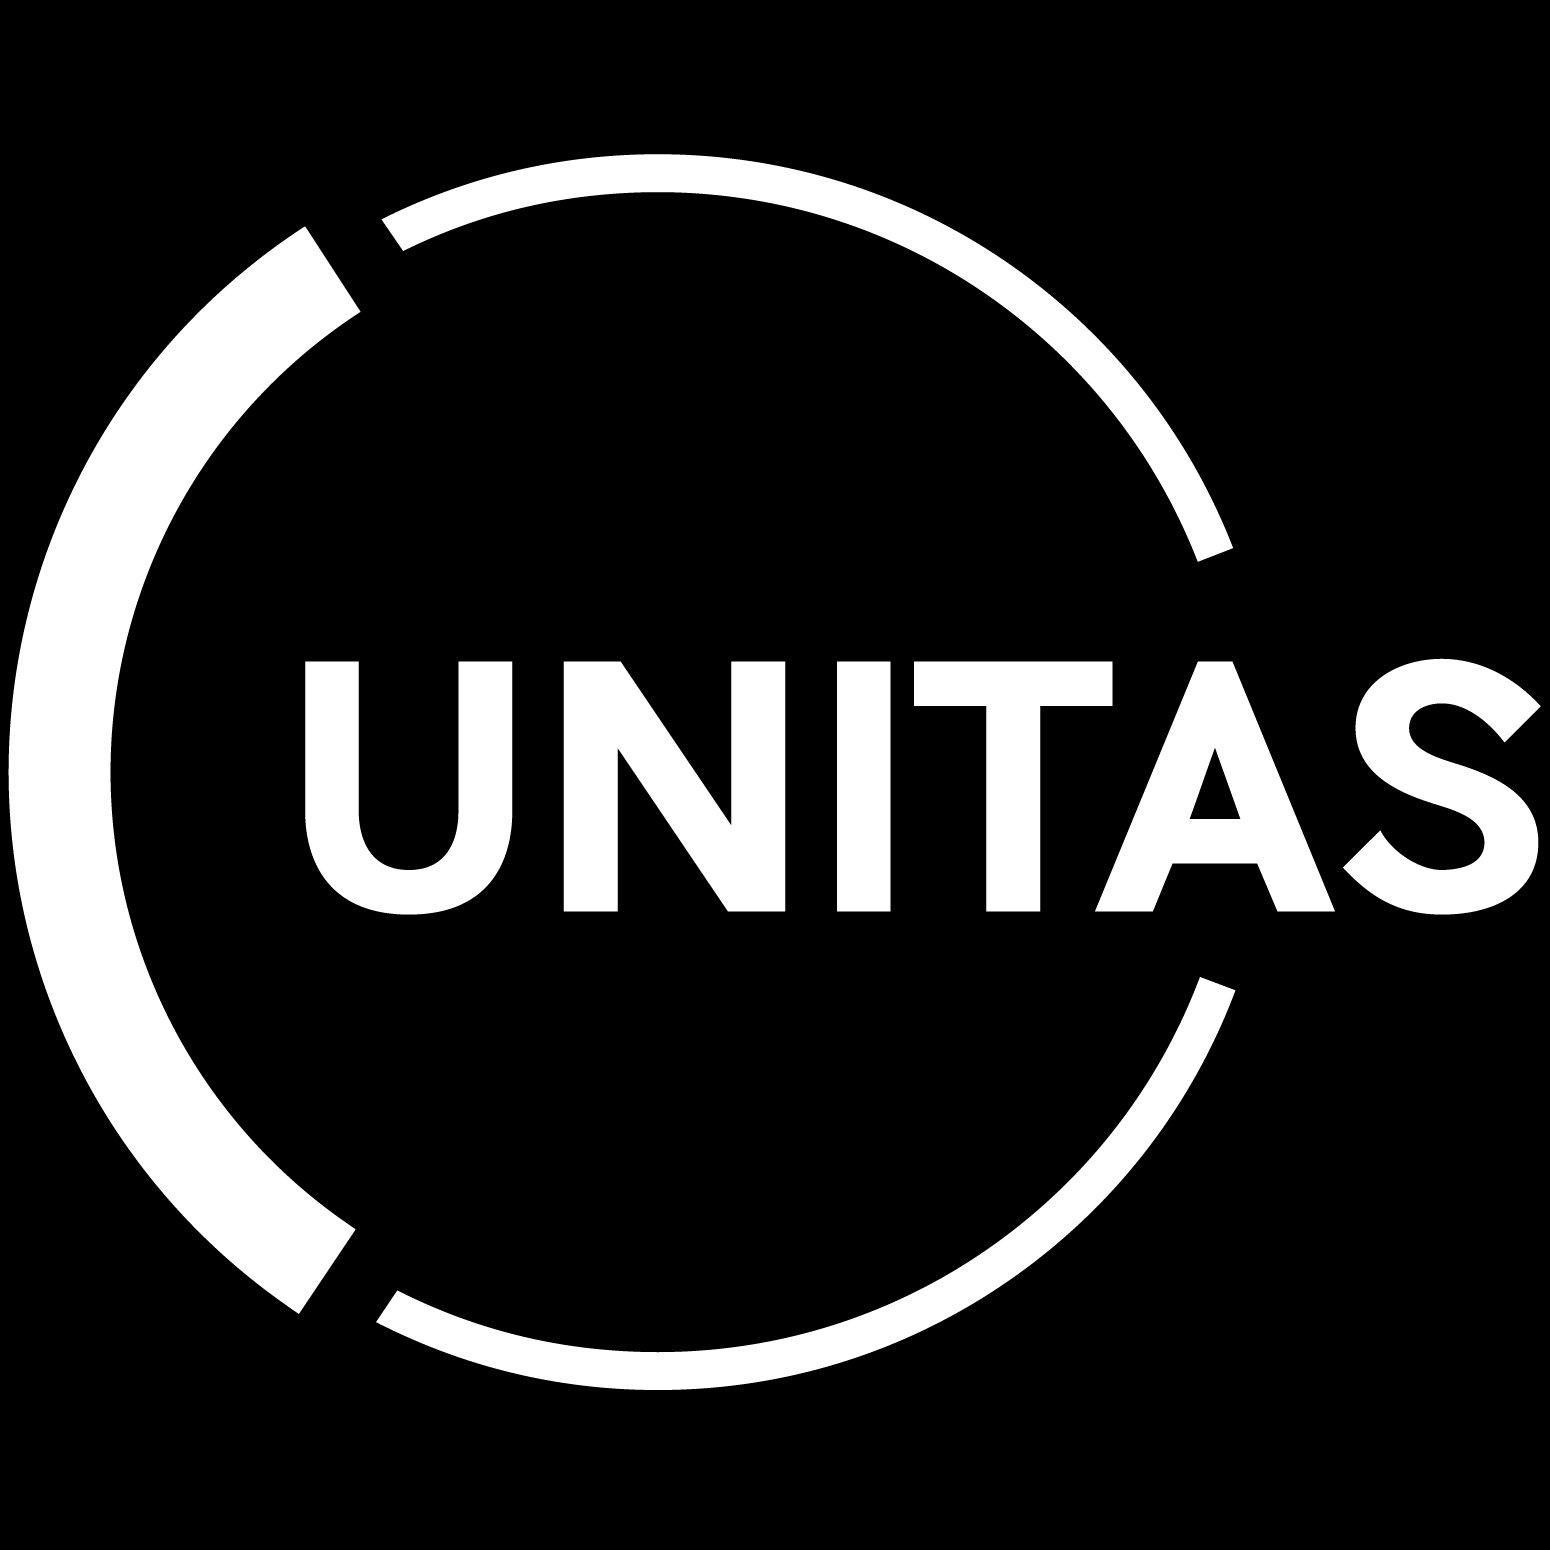 Unitas works to prevent human trafficking, make rescue possible, and provide opportunities for survivors to thrive.